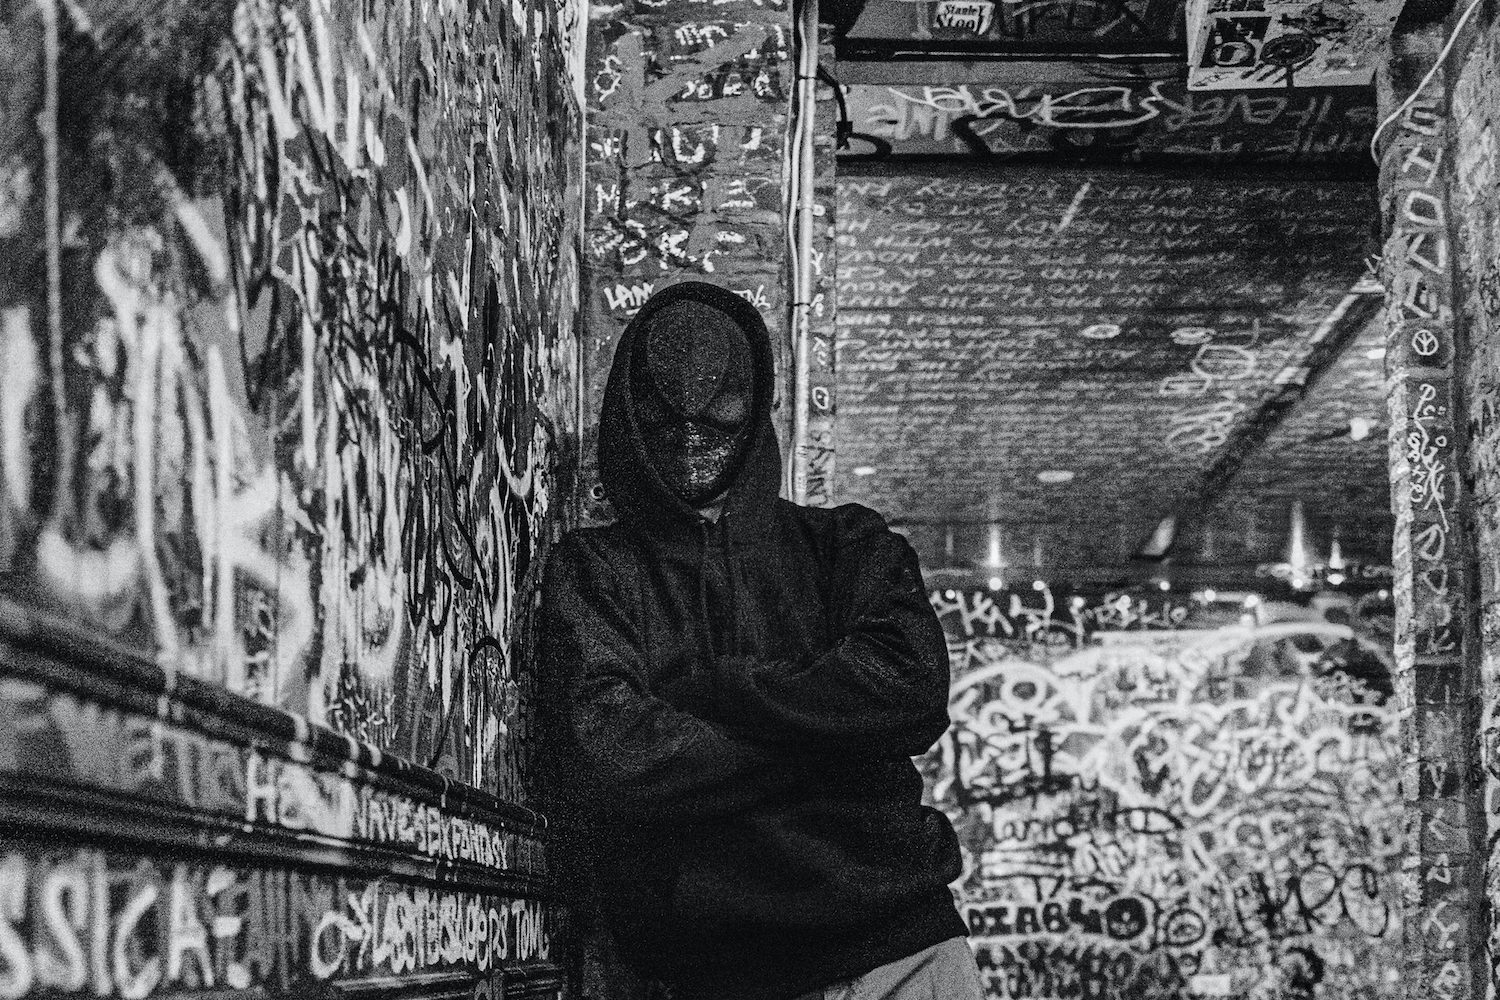 The Bloody Beetroots and JACKNIFE sharpen the blade with new single, ‘Jericho’The Bloody Beetroots Dancing Astronaut